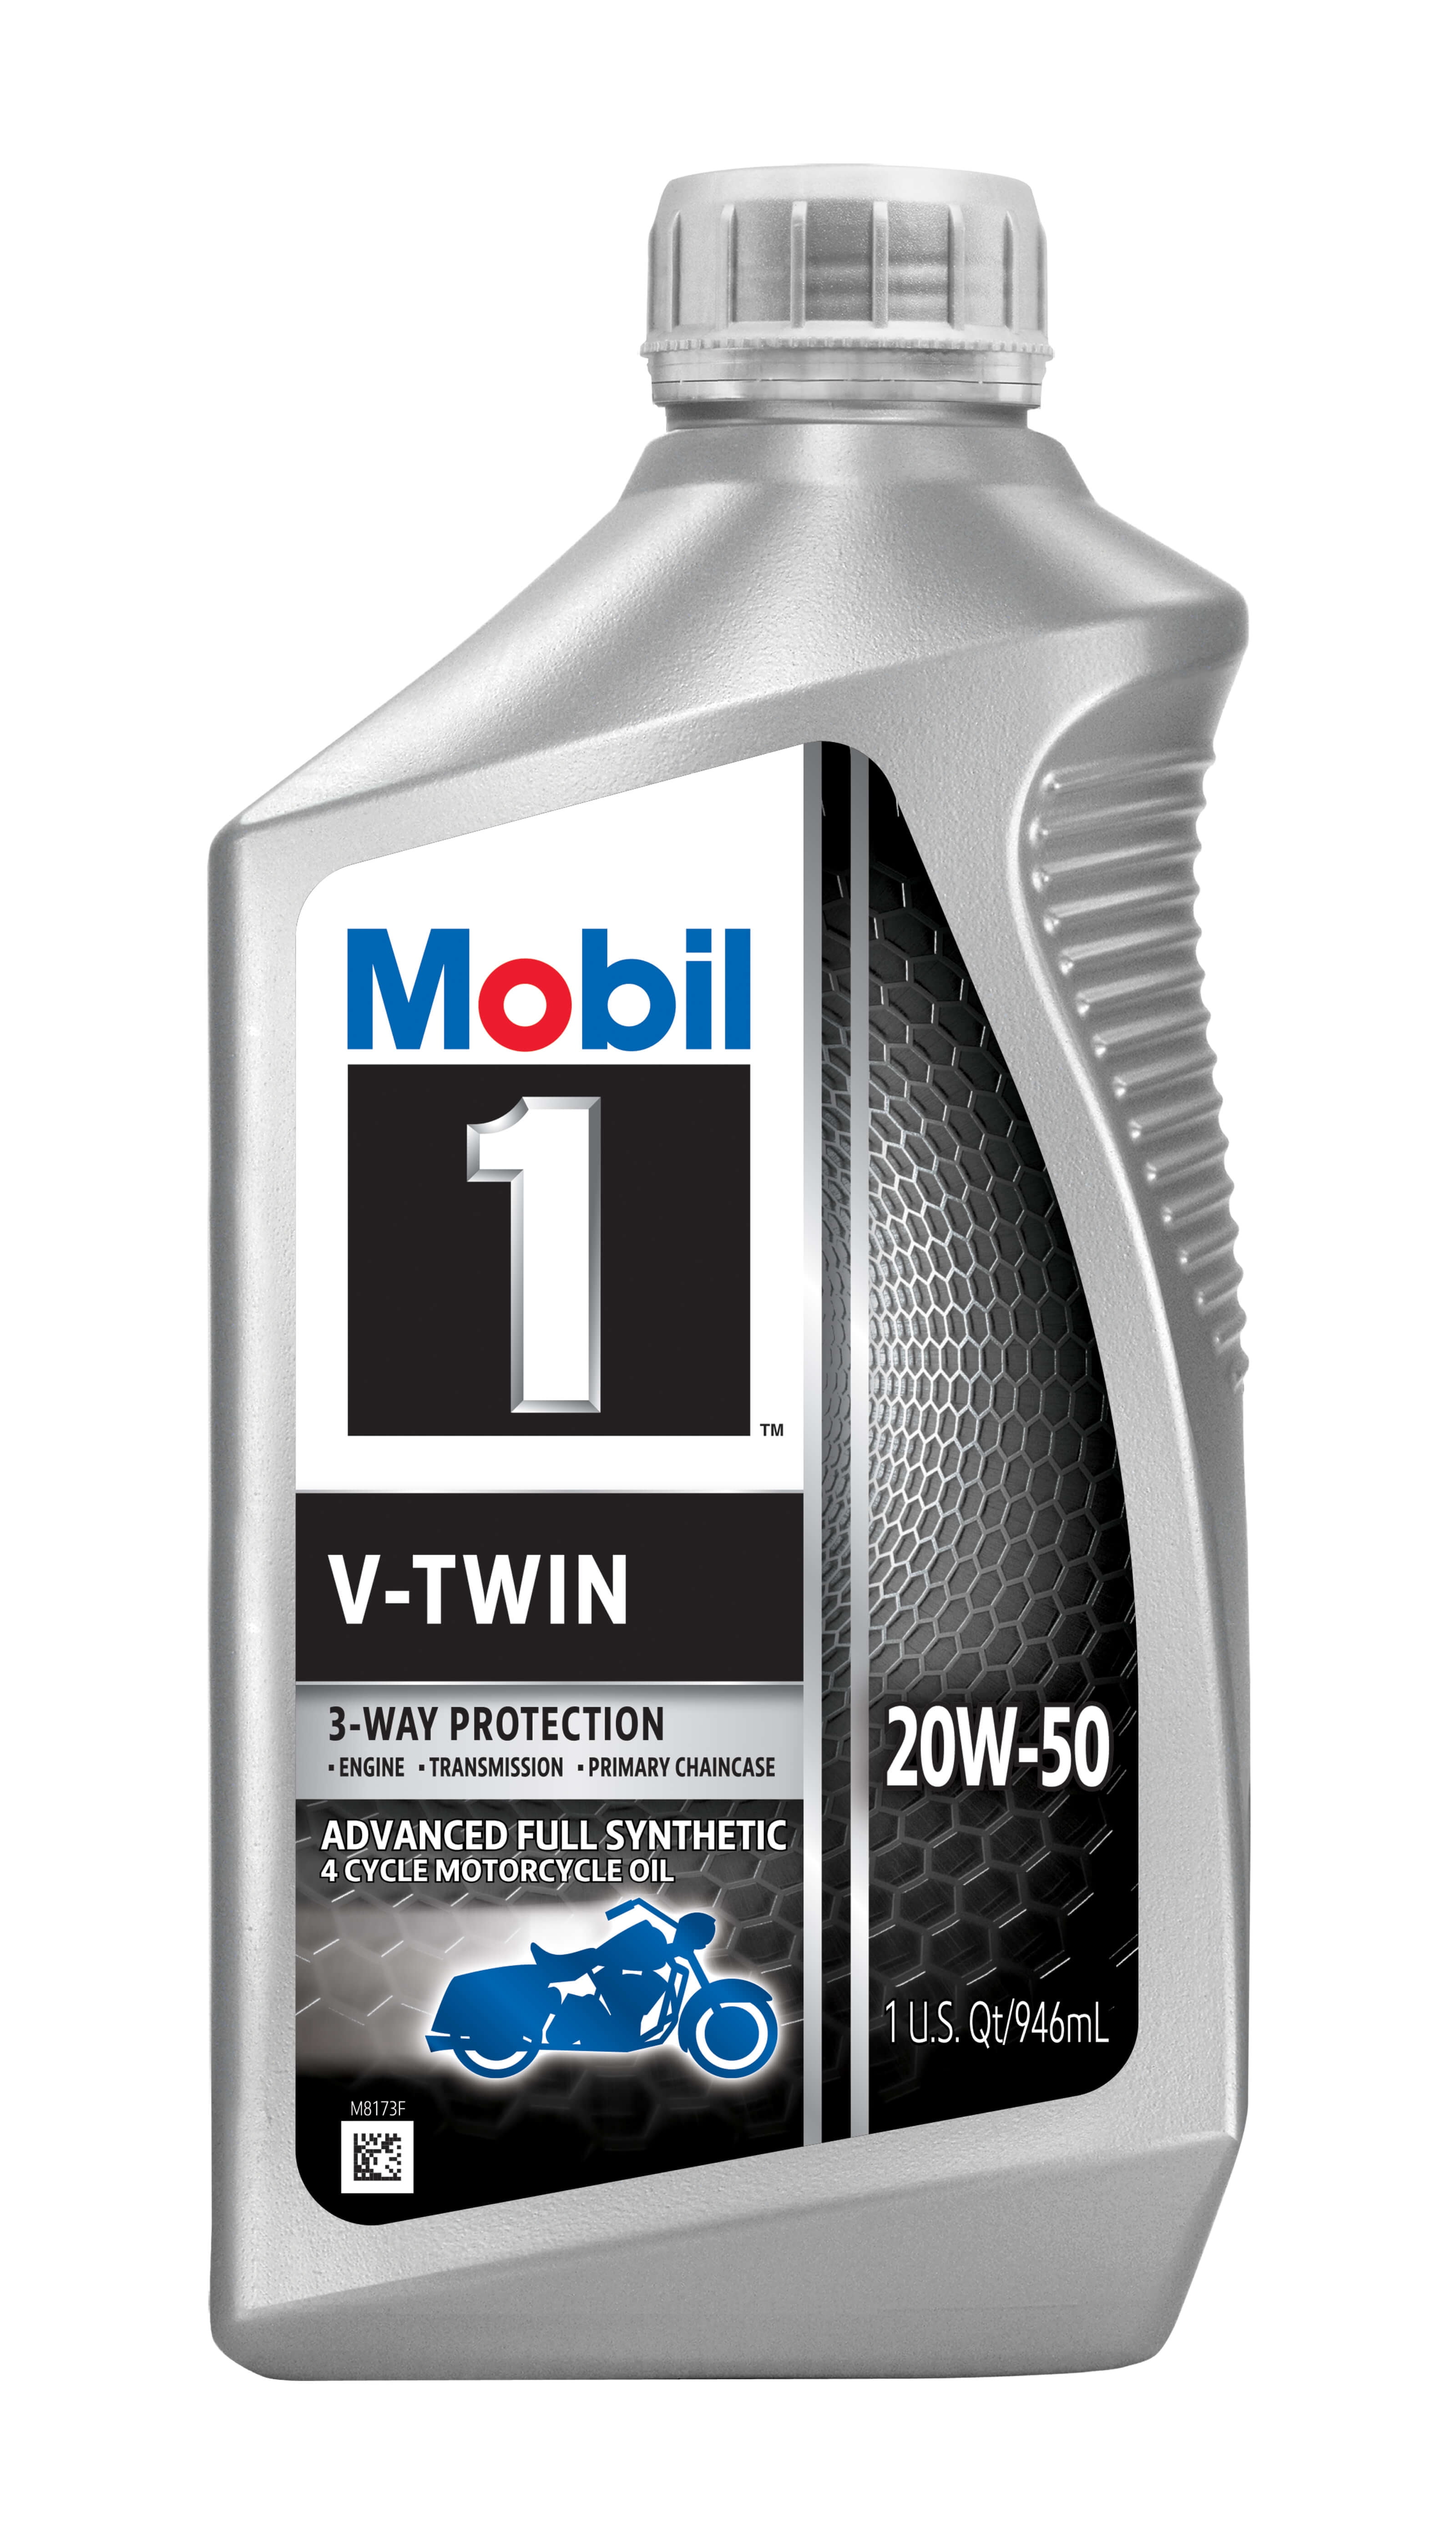 mobil-1-v-twin-full-synthetic-motorcycle-oil-20w-50-1-quart-walmart